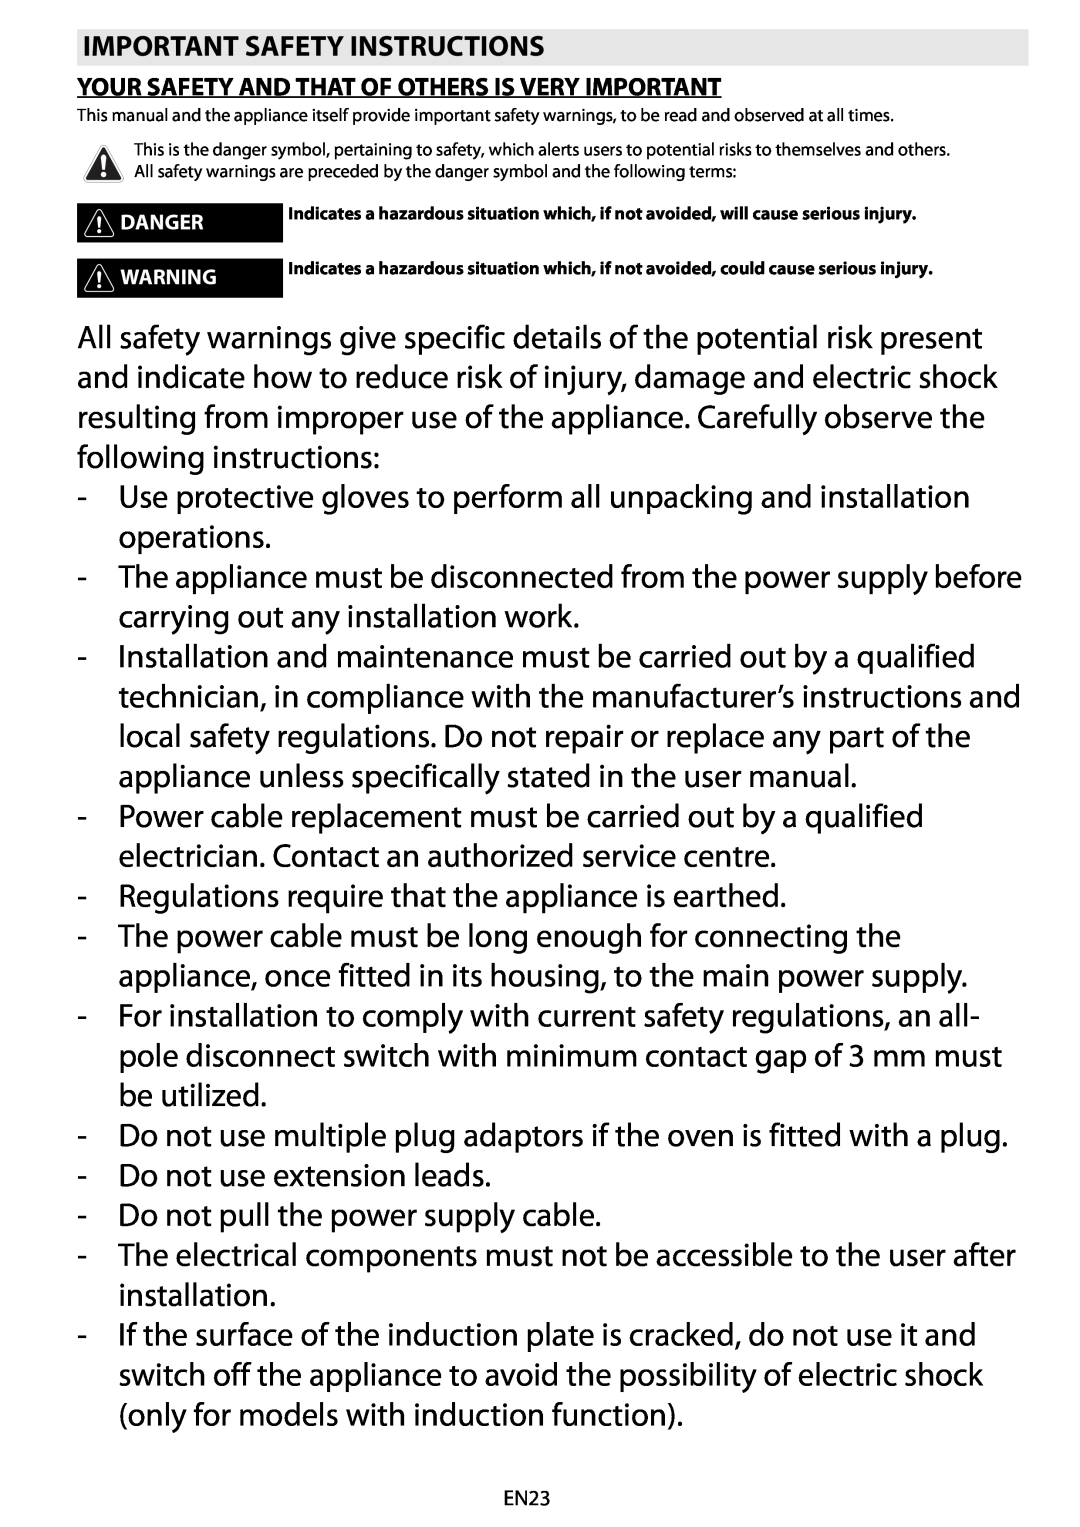 Whirlpool BMVE 8200 manuel dutilisation Regulations require that the appliance is earthed 